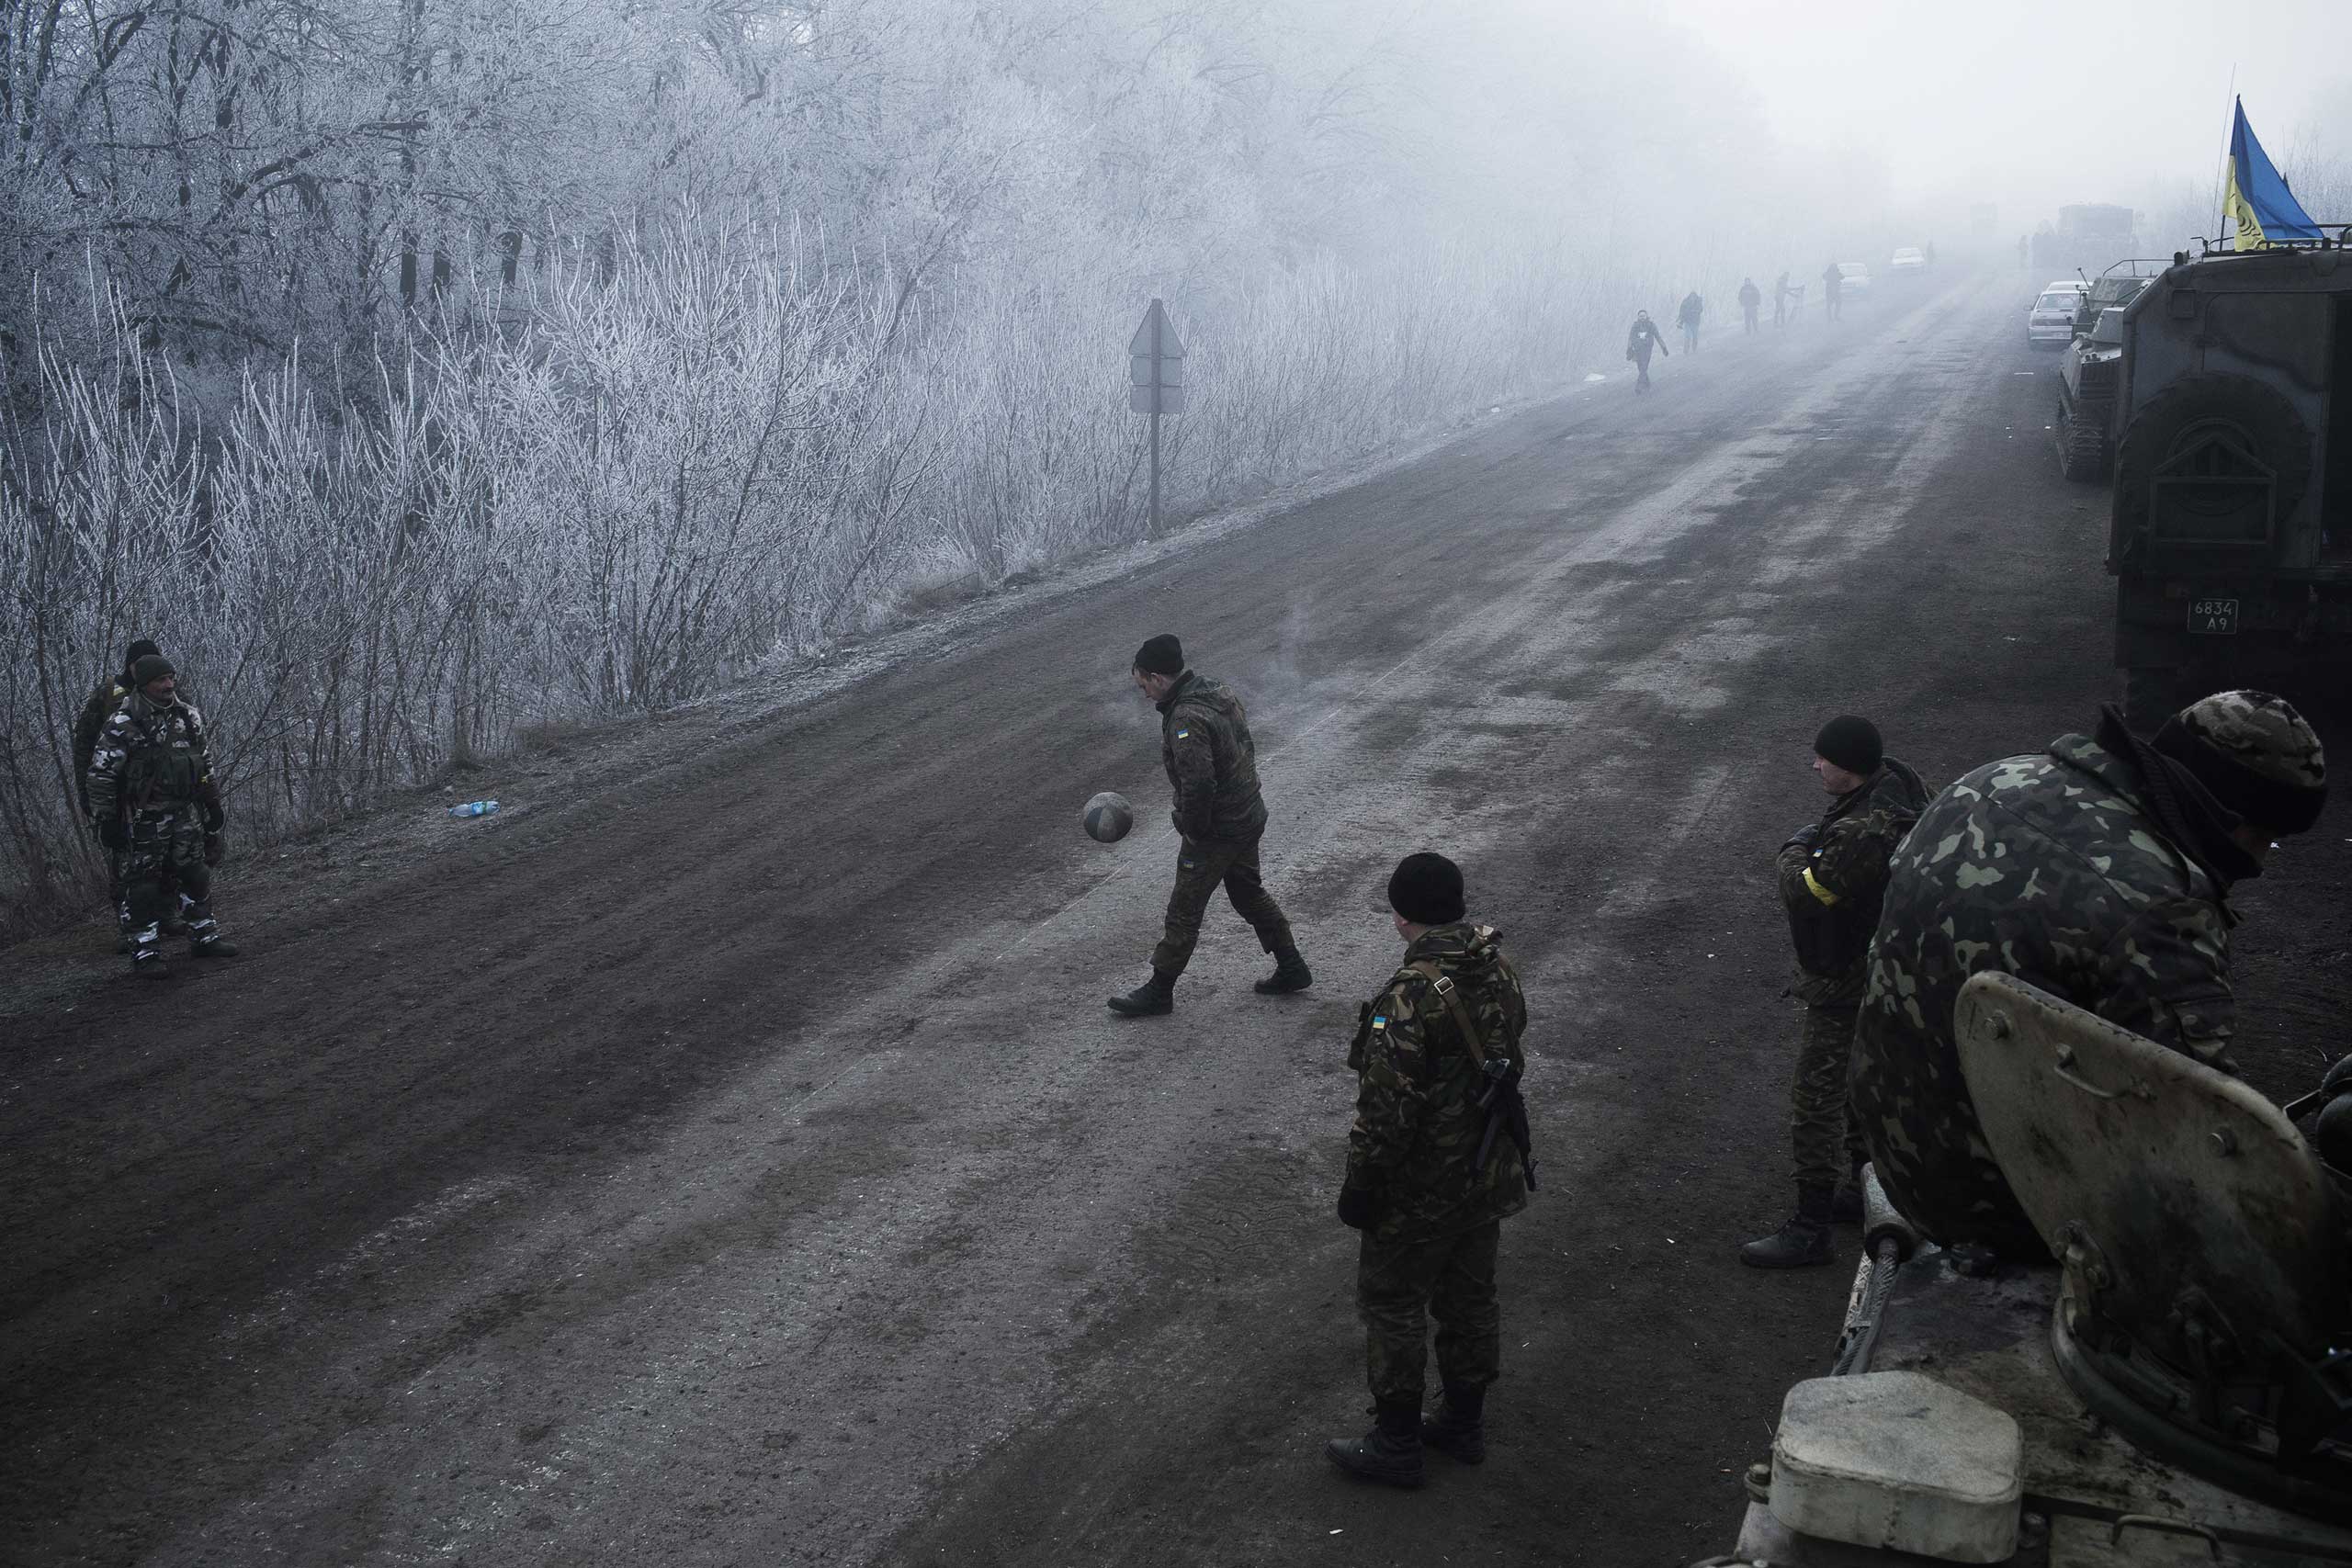 Ukrainian soldiers conduct operations along the road in Artemivsk, Ukraine, leading to the embattled town of Debaltseve Feb. 15, 2015. A ceasefire between Pro-Russian separatists and the Ukrainian forces brokered by the European Union, Russia and Ukraine began at midnight that day.